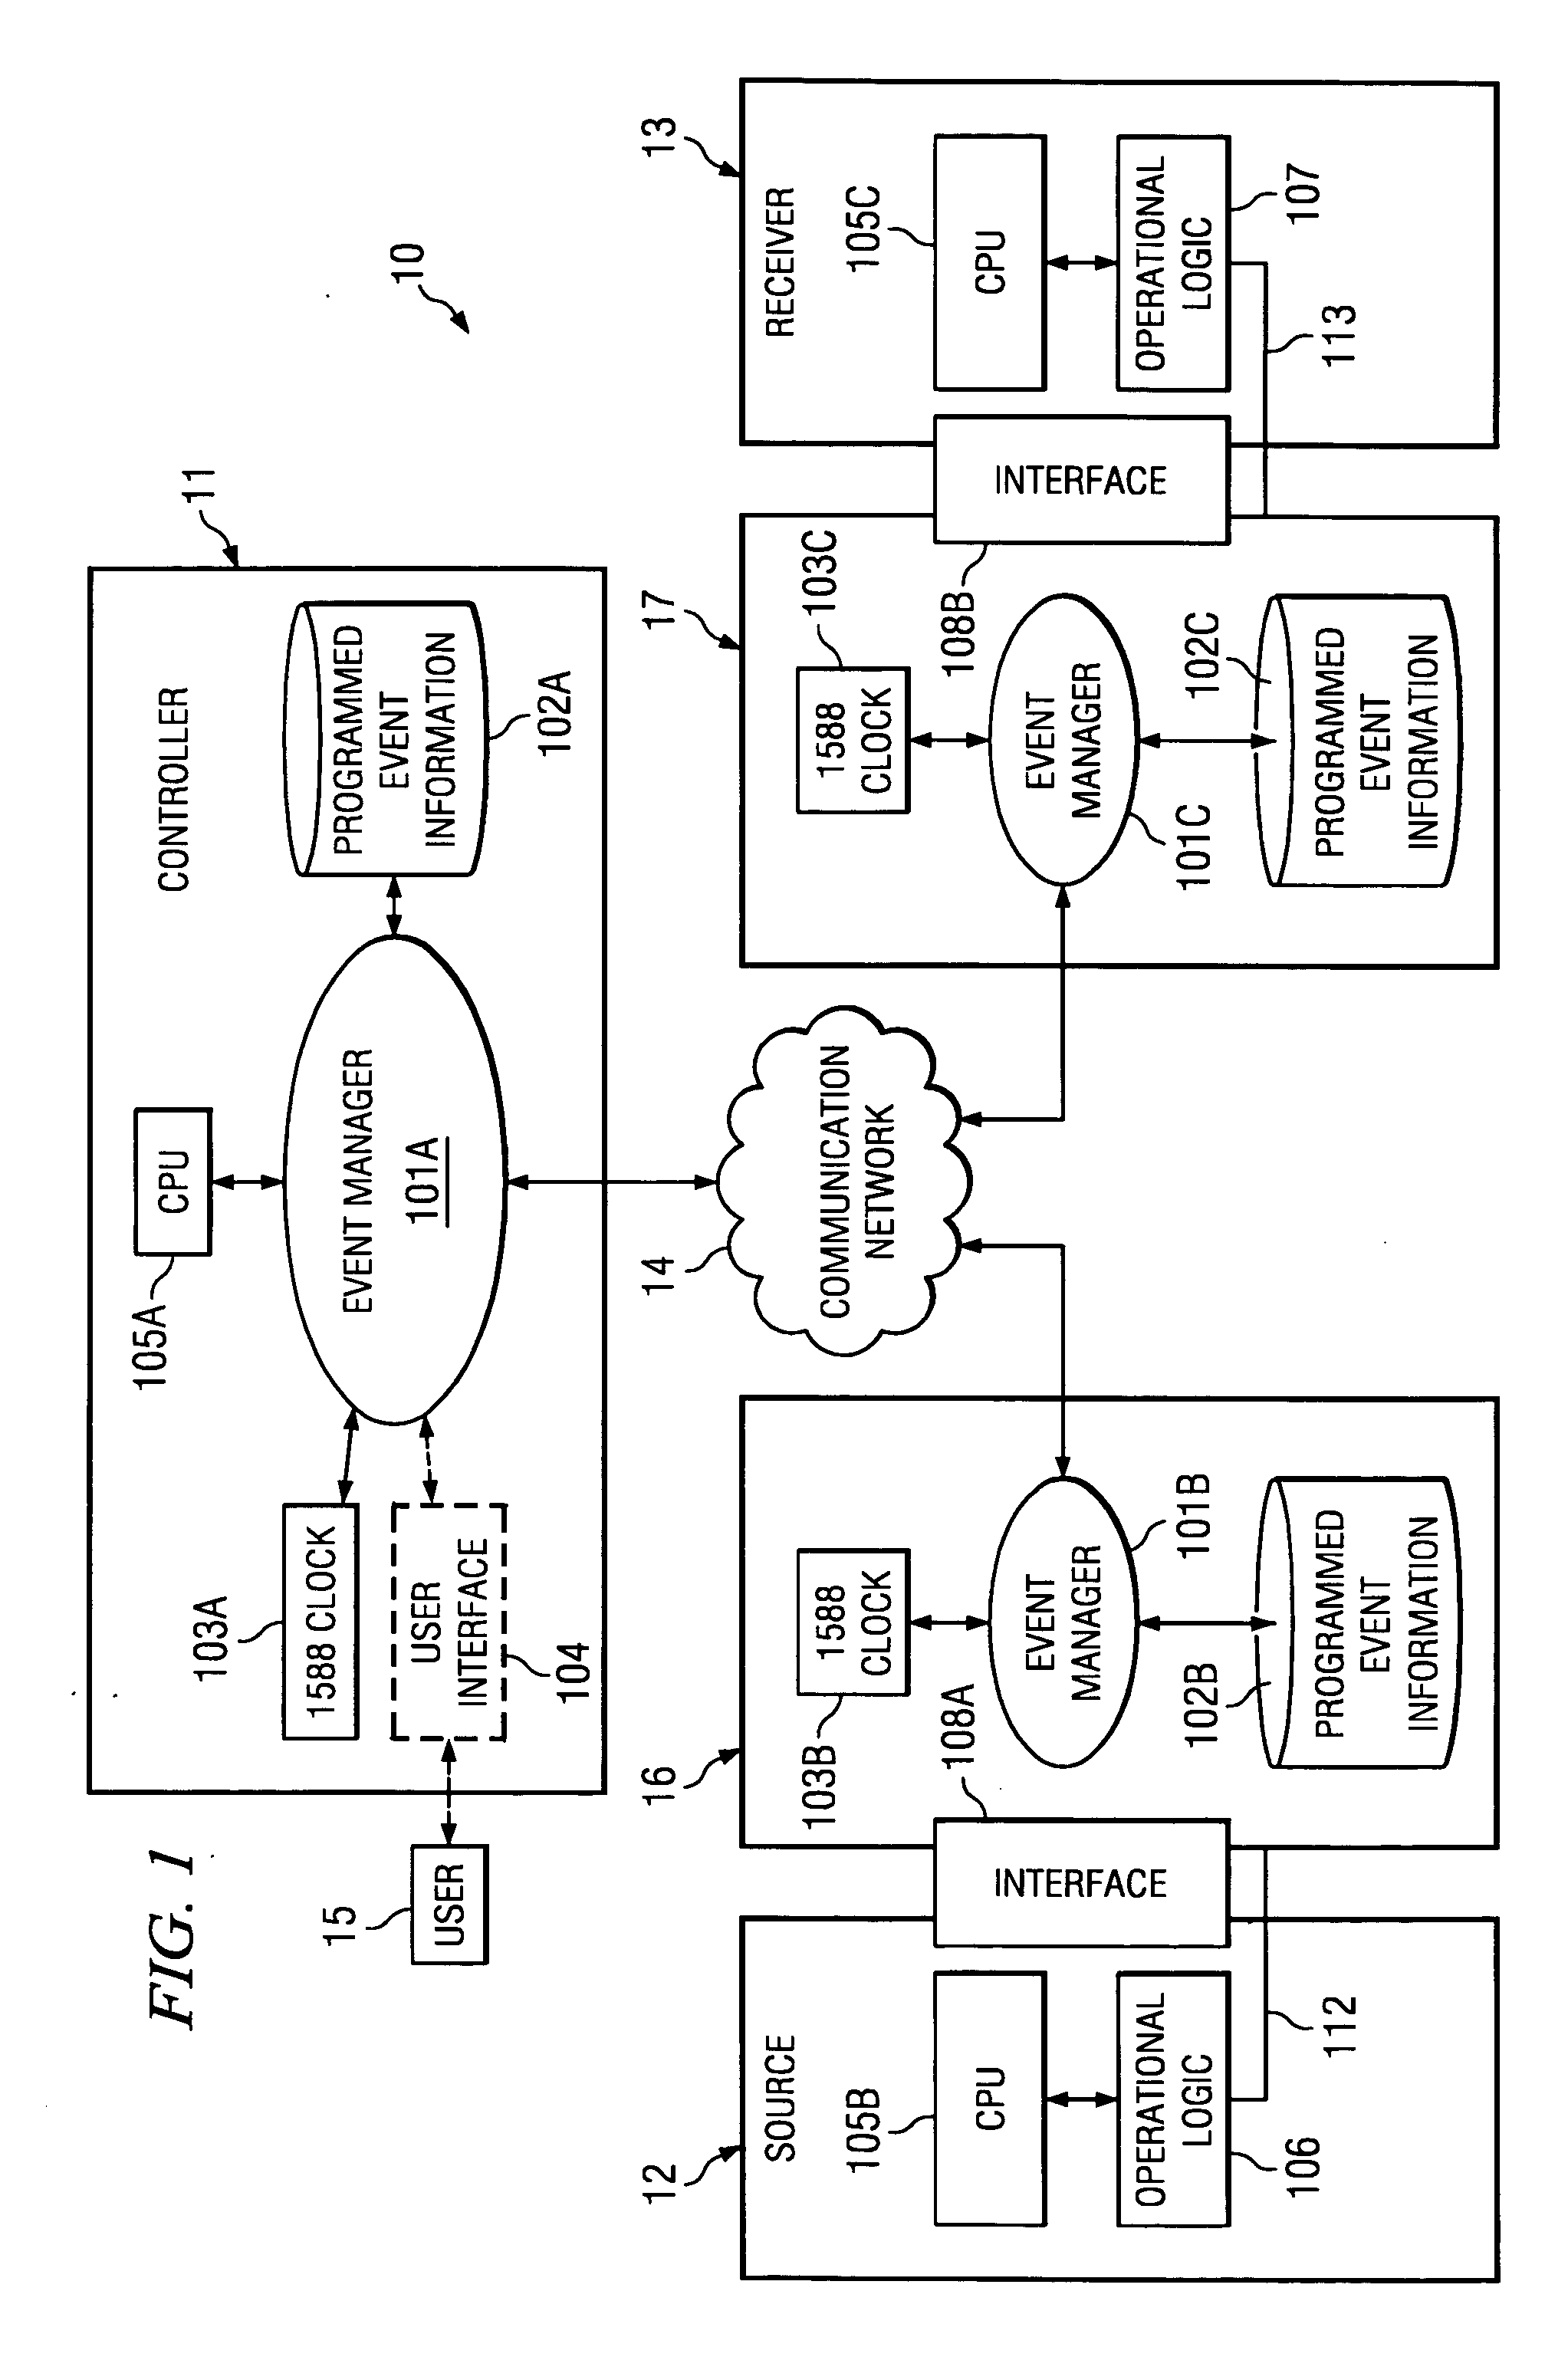 Add-on module for synchronizing operations of a plurality of devices